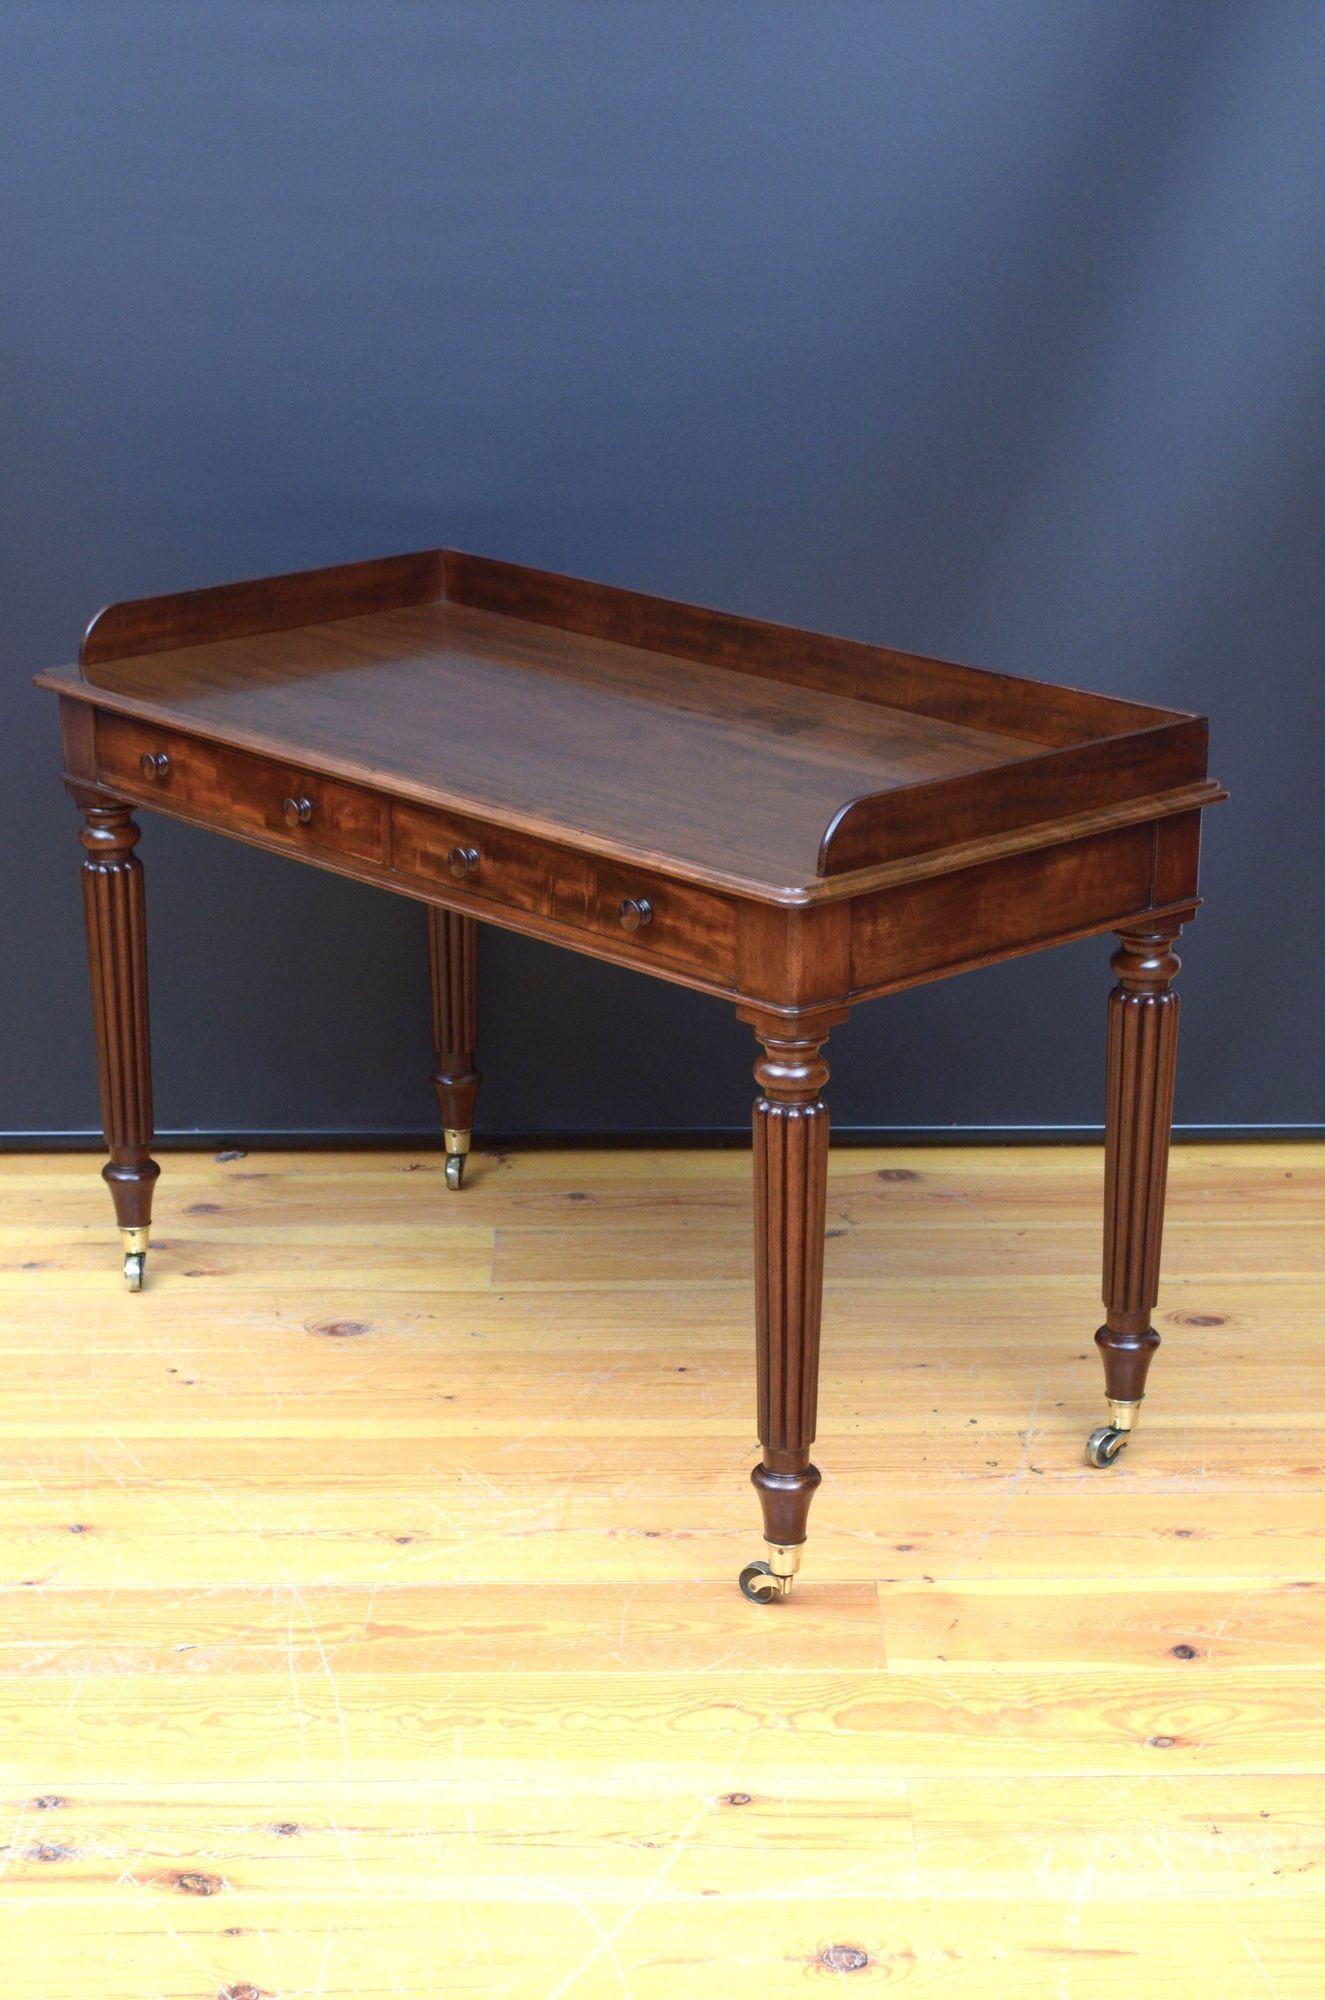 St037 Fine quality Regency dressing table / writing desk in mahogany, having shaped upstand, figured mahogany top with moulded edge and two oak lined drawers fitted with turned knobs, all standing on turned and fluted legs terminating in original